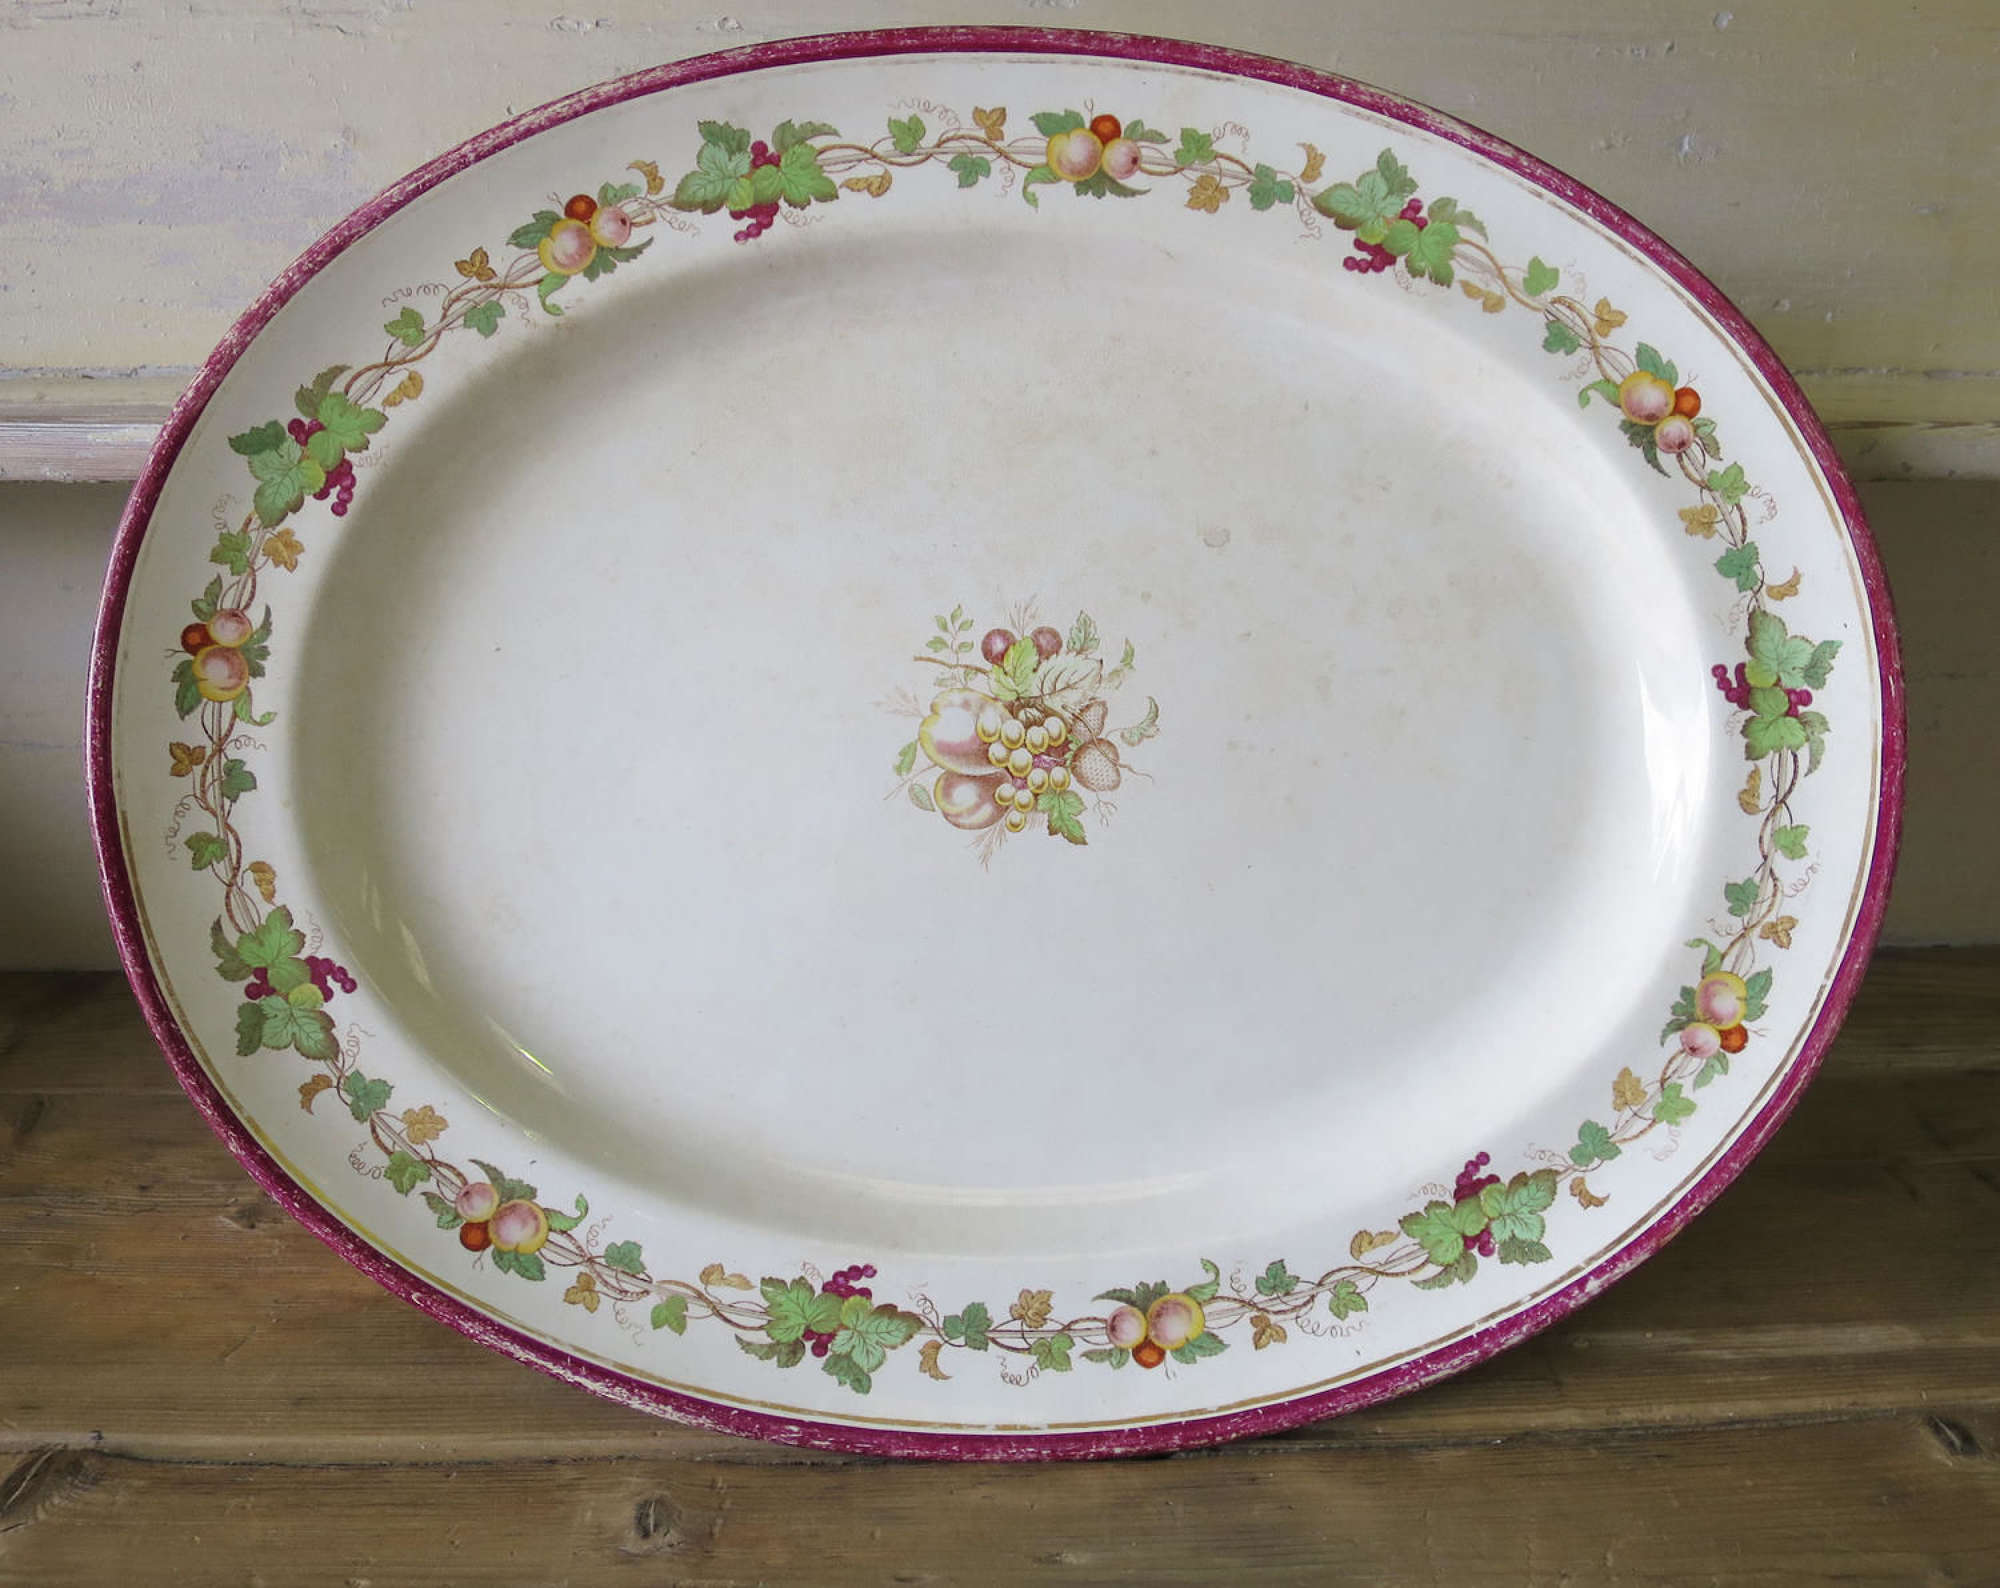 Large 19th century French Servery Plate - Circa 1850